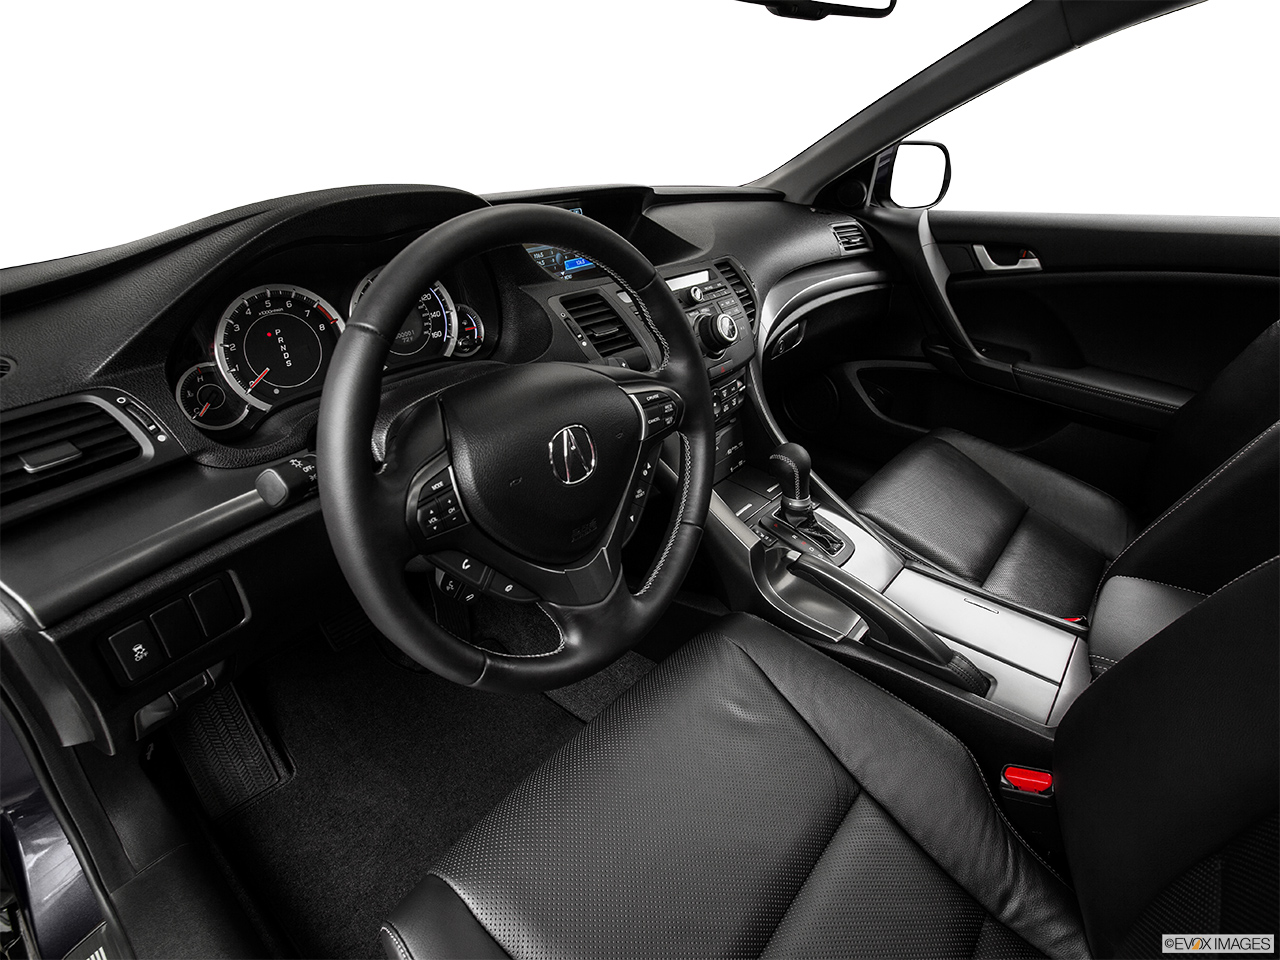 2014 Acura TSX 5-Speed Automatic Interior Hero (driver's side). 